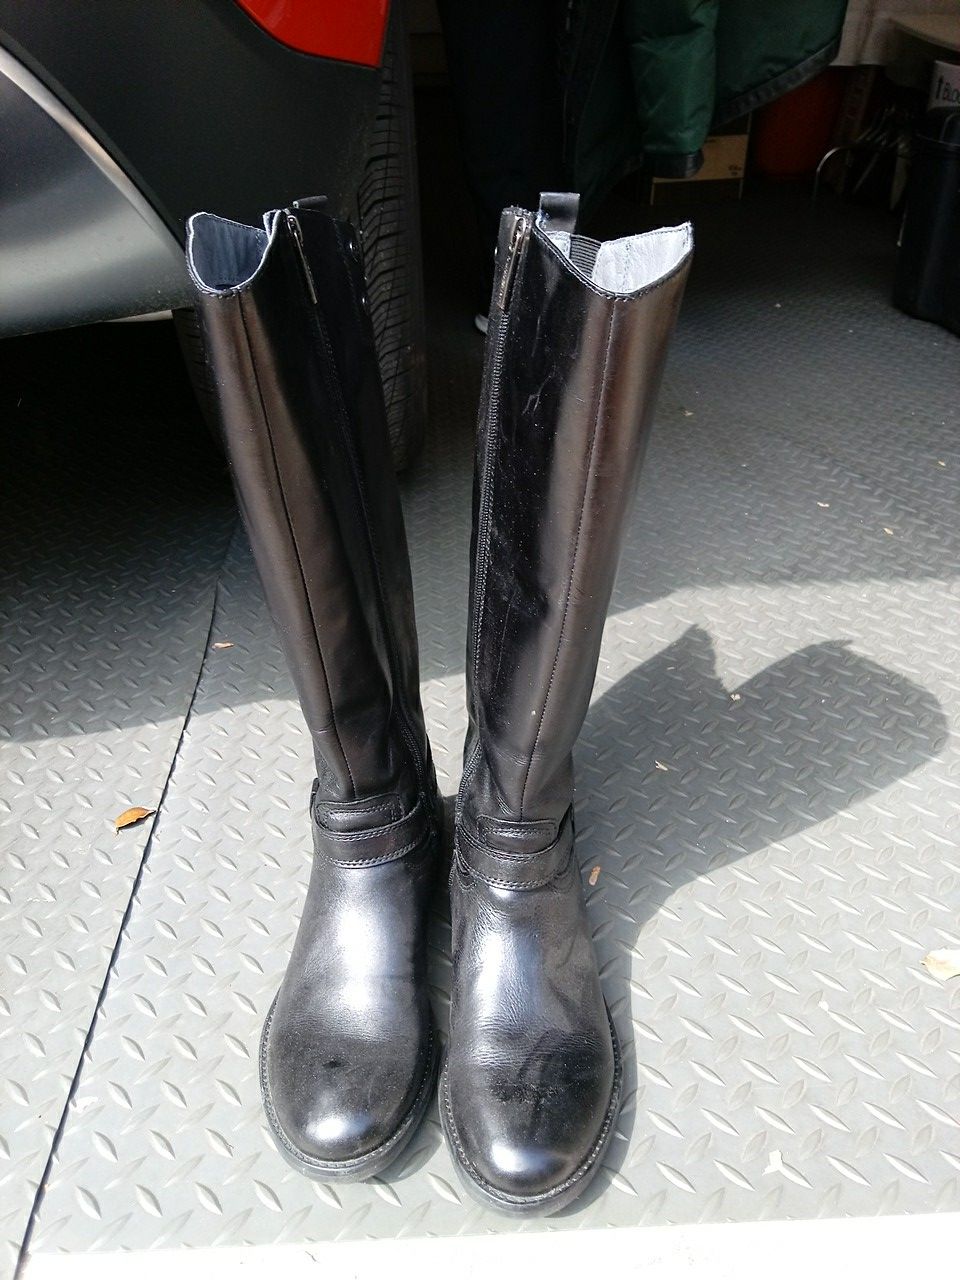 Almost new black leather boots, size 40 or 8.5